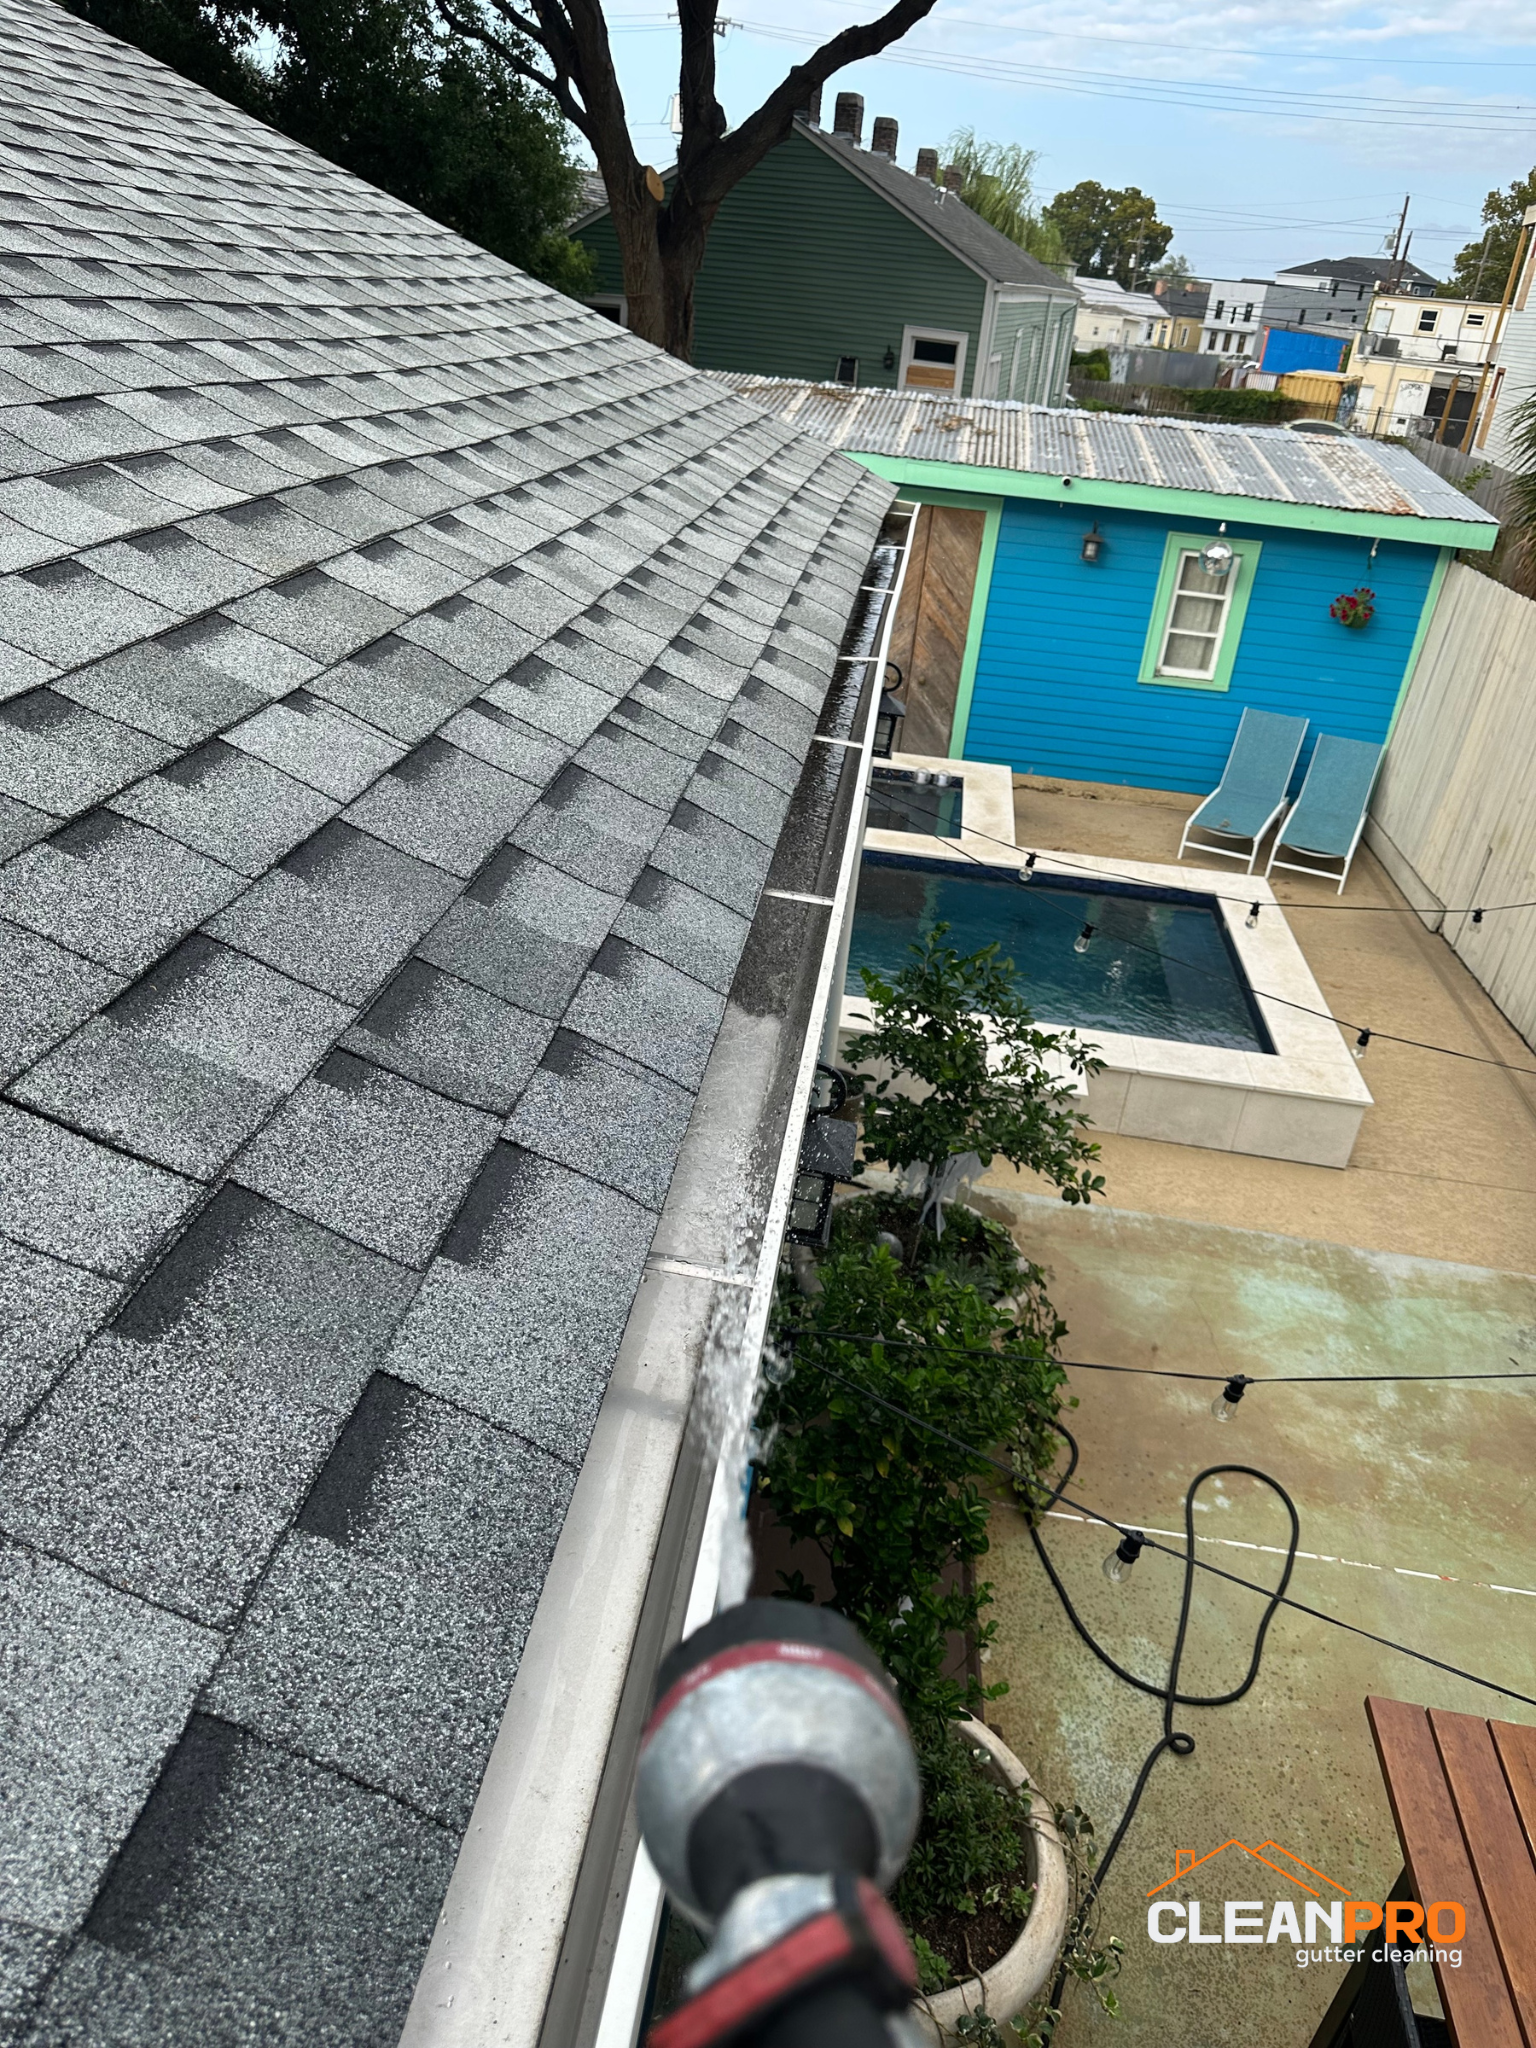 Residential Gutter Cleaning in Austin TX